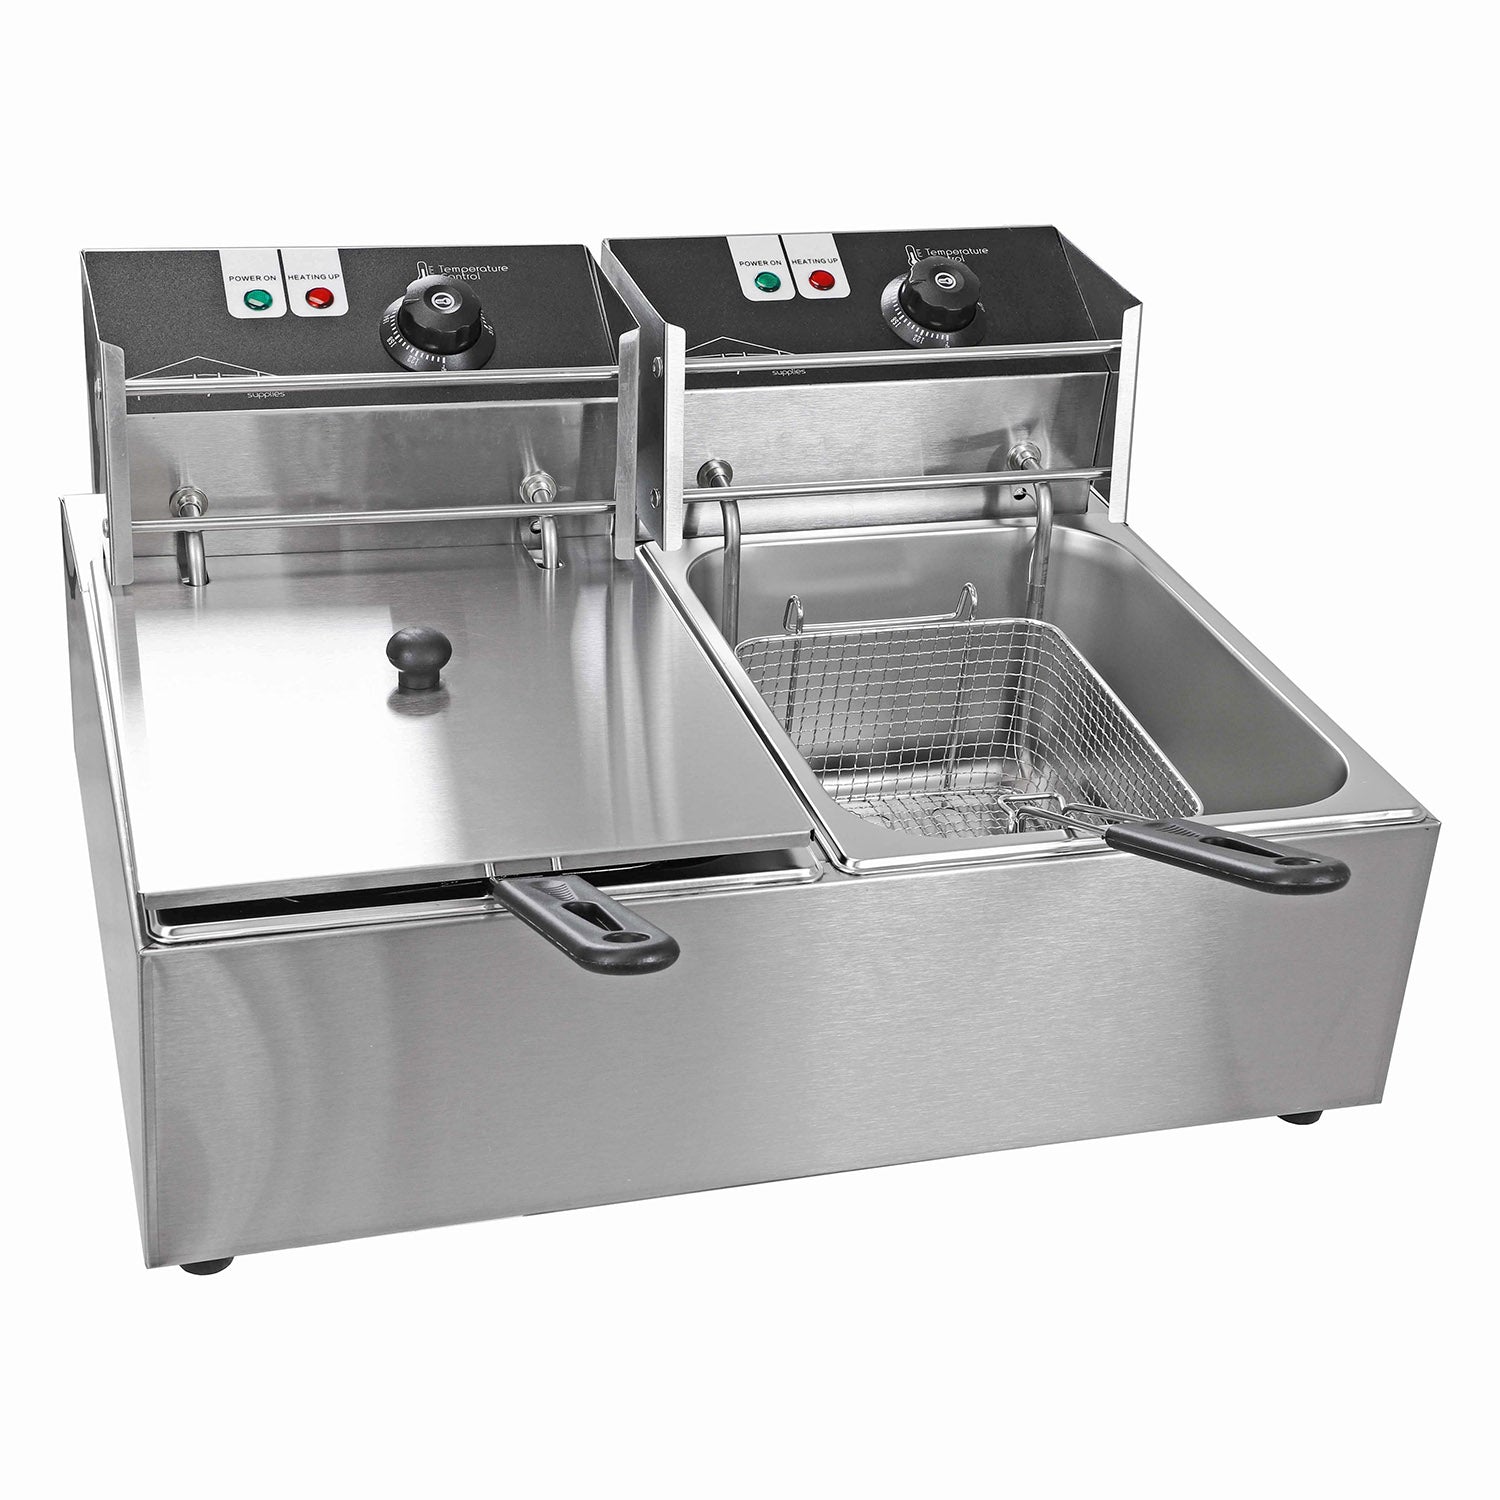 PartyHut 12 Liter Stainless Steel Dual Tank Commercial Countertop Deep Fryer  Machine 110v, 1 each - Foods Co.